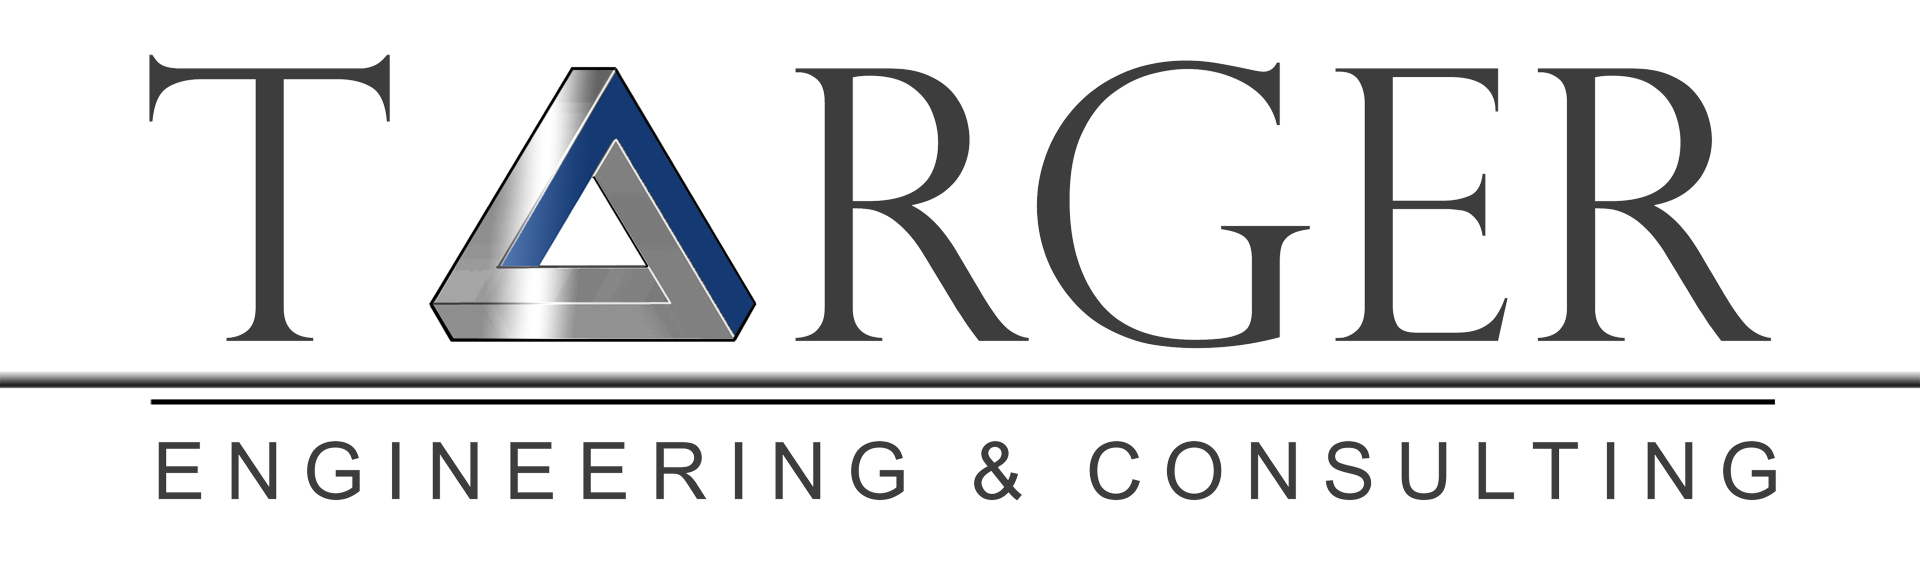 Targer.ba  - Engineering & Consulting